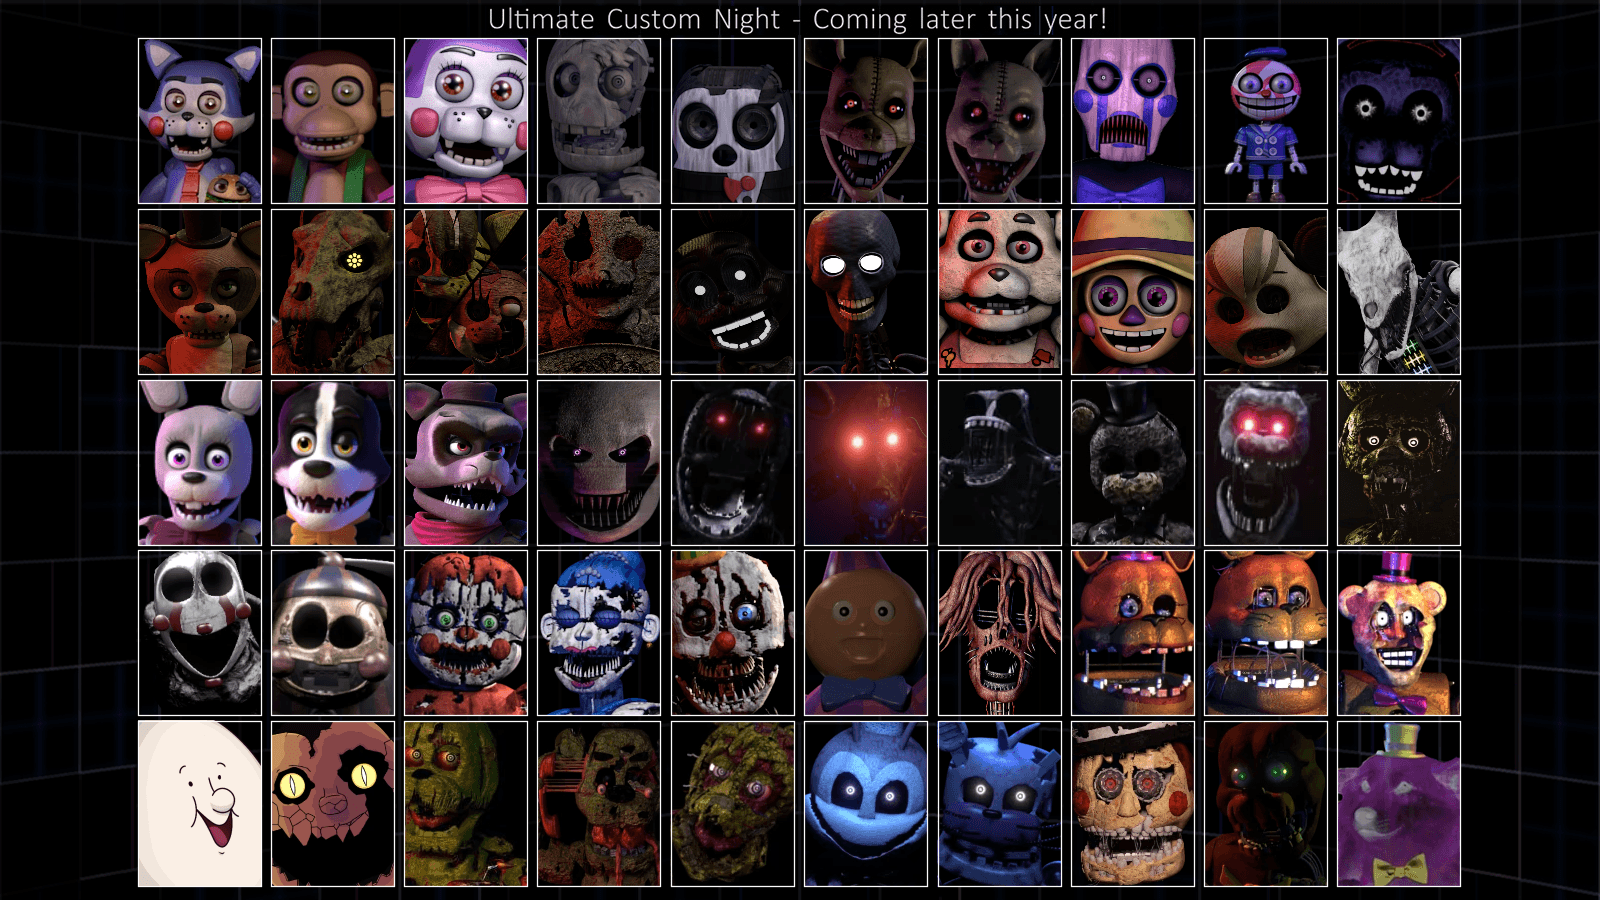 HD desktop wallpaper: Video Game, Five Nights At Freddy's: Ultimate Custom  Night download free picture #1531145